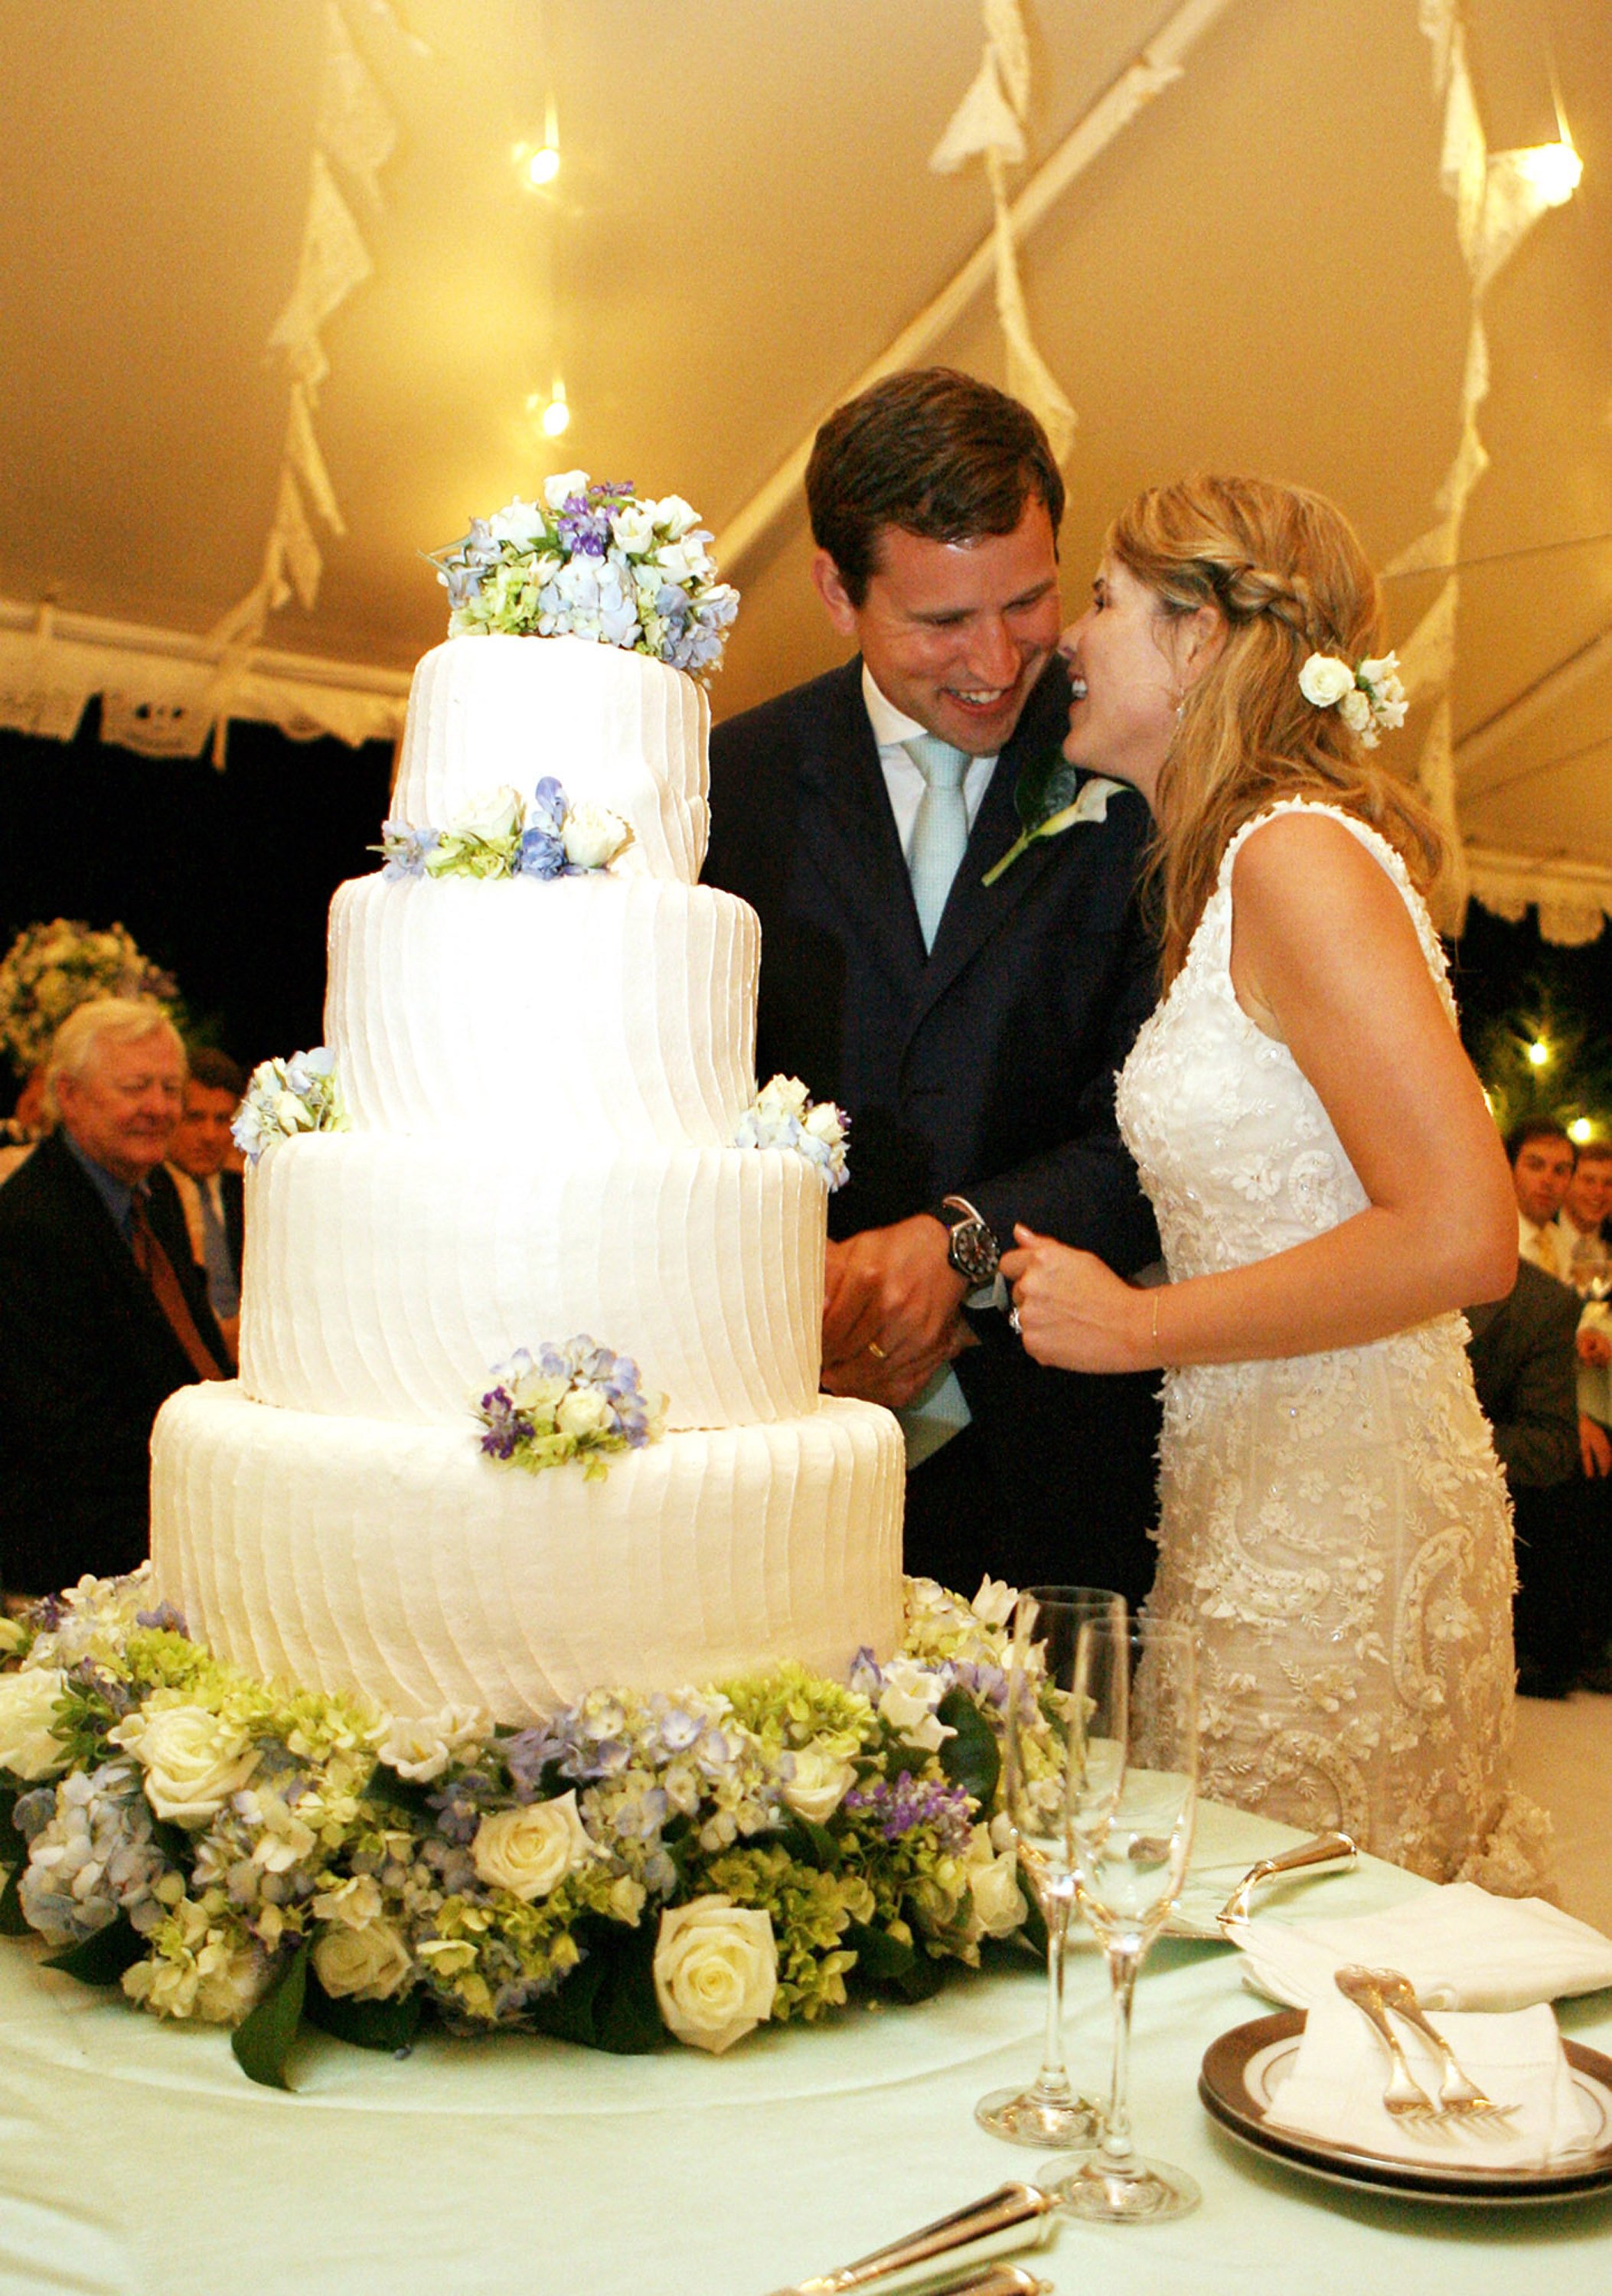 Henry and Jenna Hager are about to cut their wedding cake during their wedding reception | Source: Getty Images